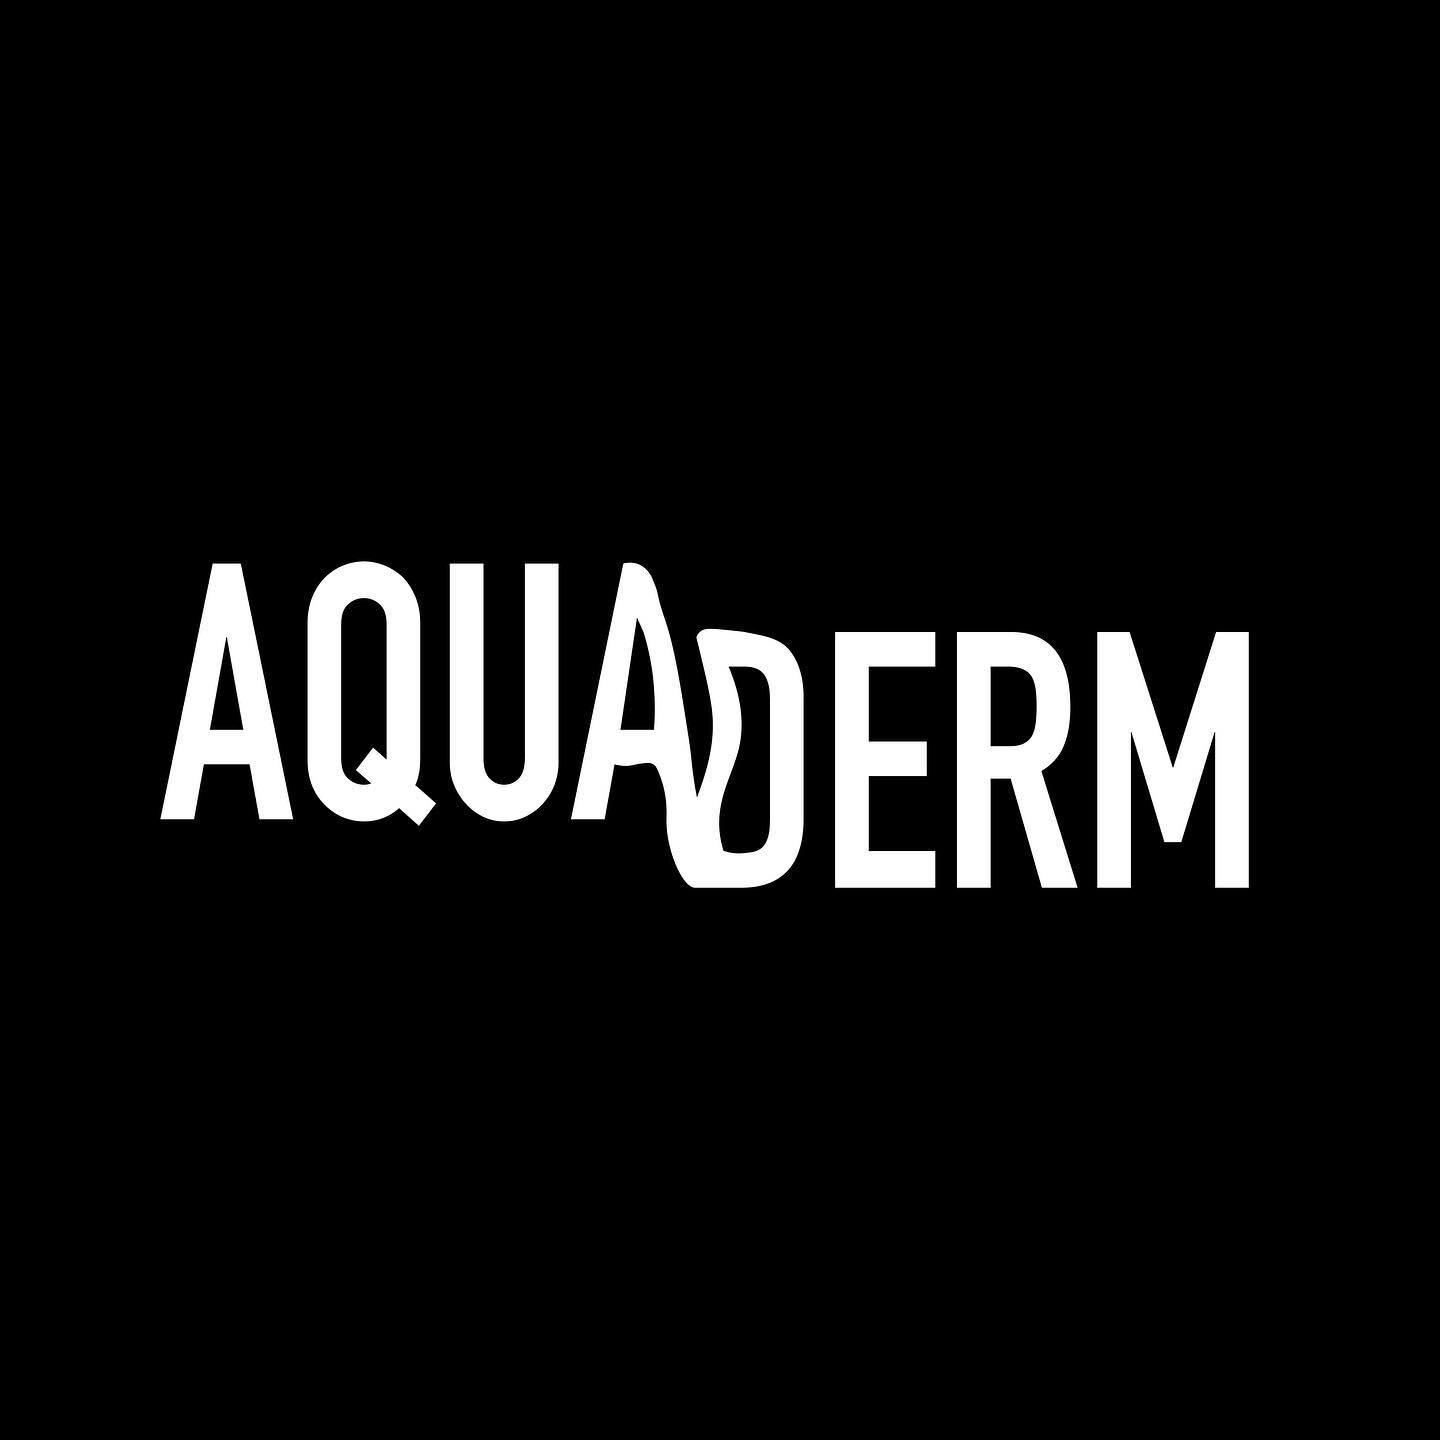 Been awhile! But here&rsquo;s a TypeFace Logo Design! Hope everyone is going well in their self-isolation! Stay safe! 
AquaDerm - an Aussie/New Zealand wet suit brand! Design targeted at Trendy Teenage Surfers 🤙🏻